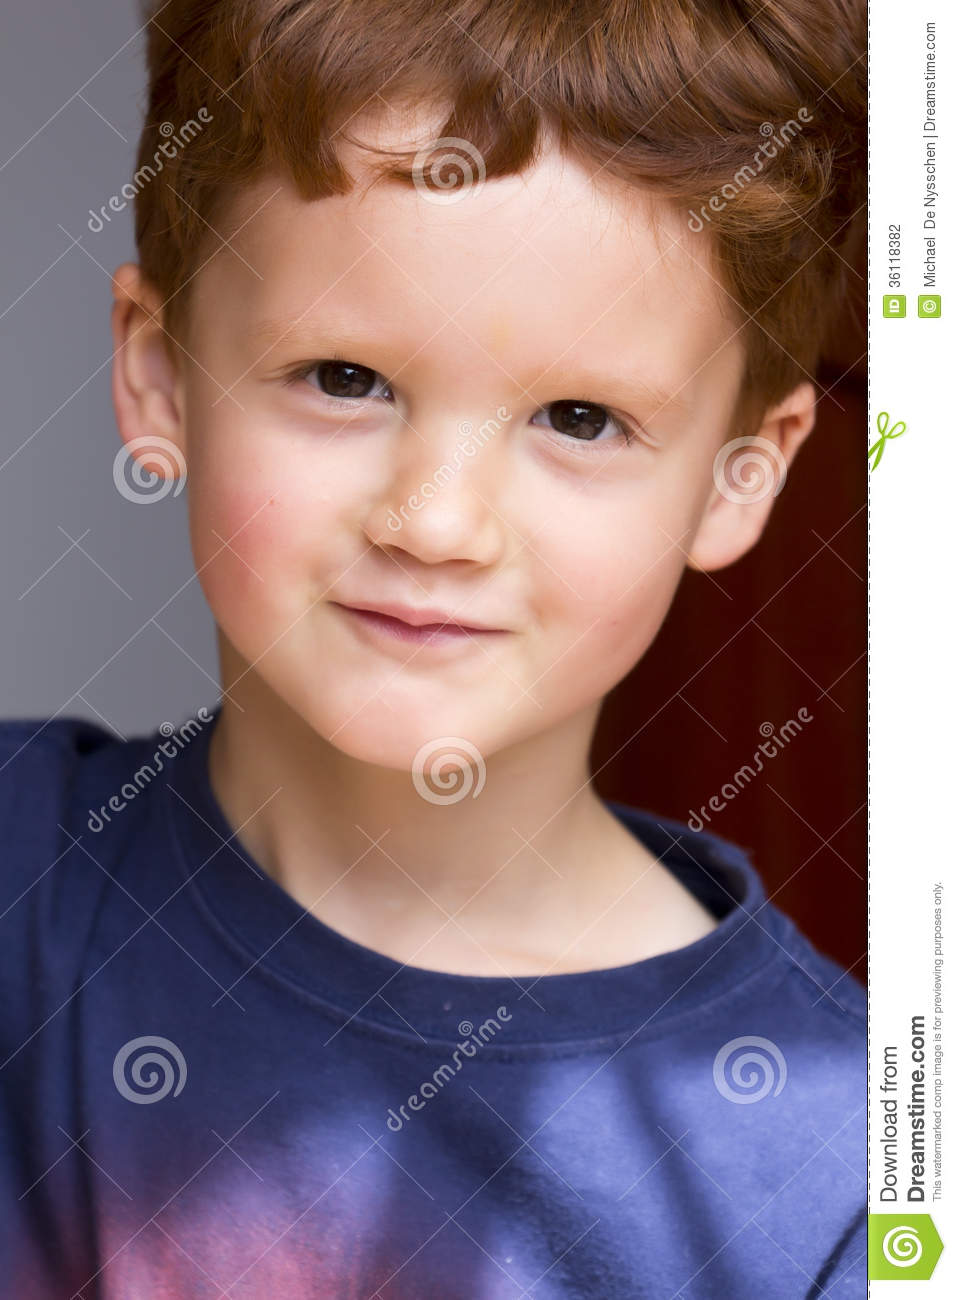 Young Boy With Auburn Or Red Hair And Brown Hair  He Is Looking At